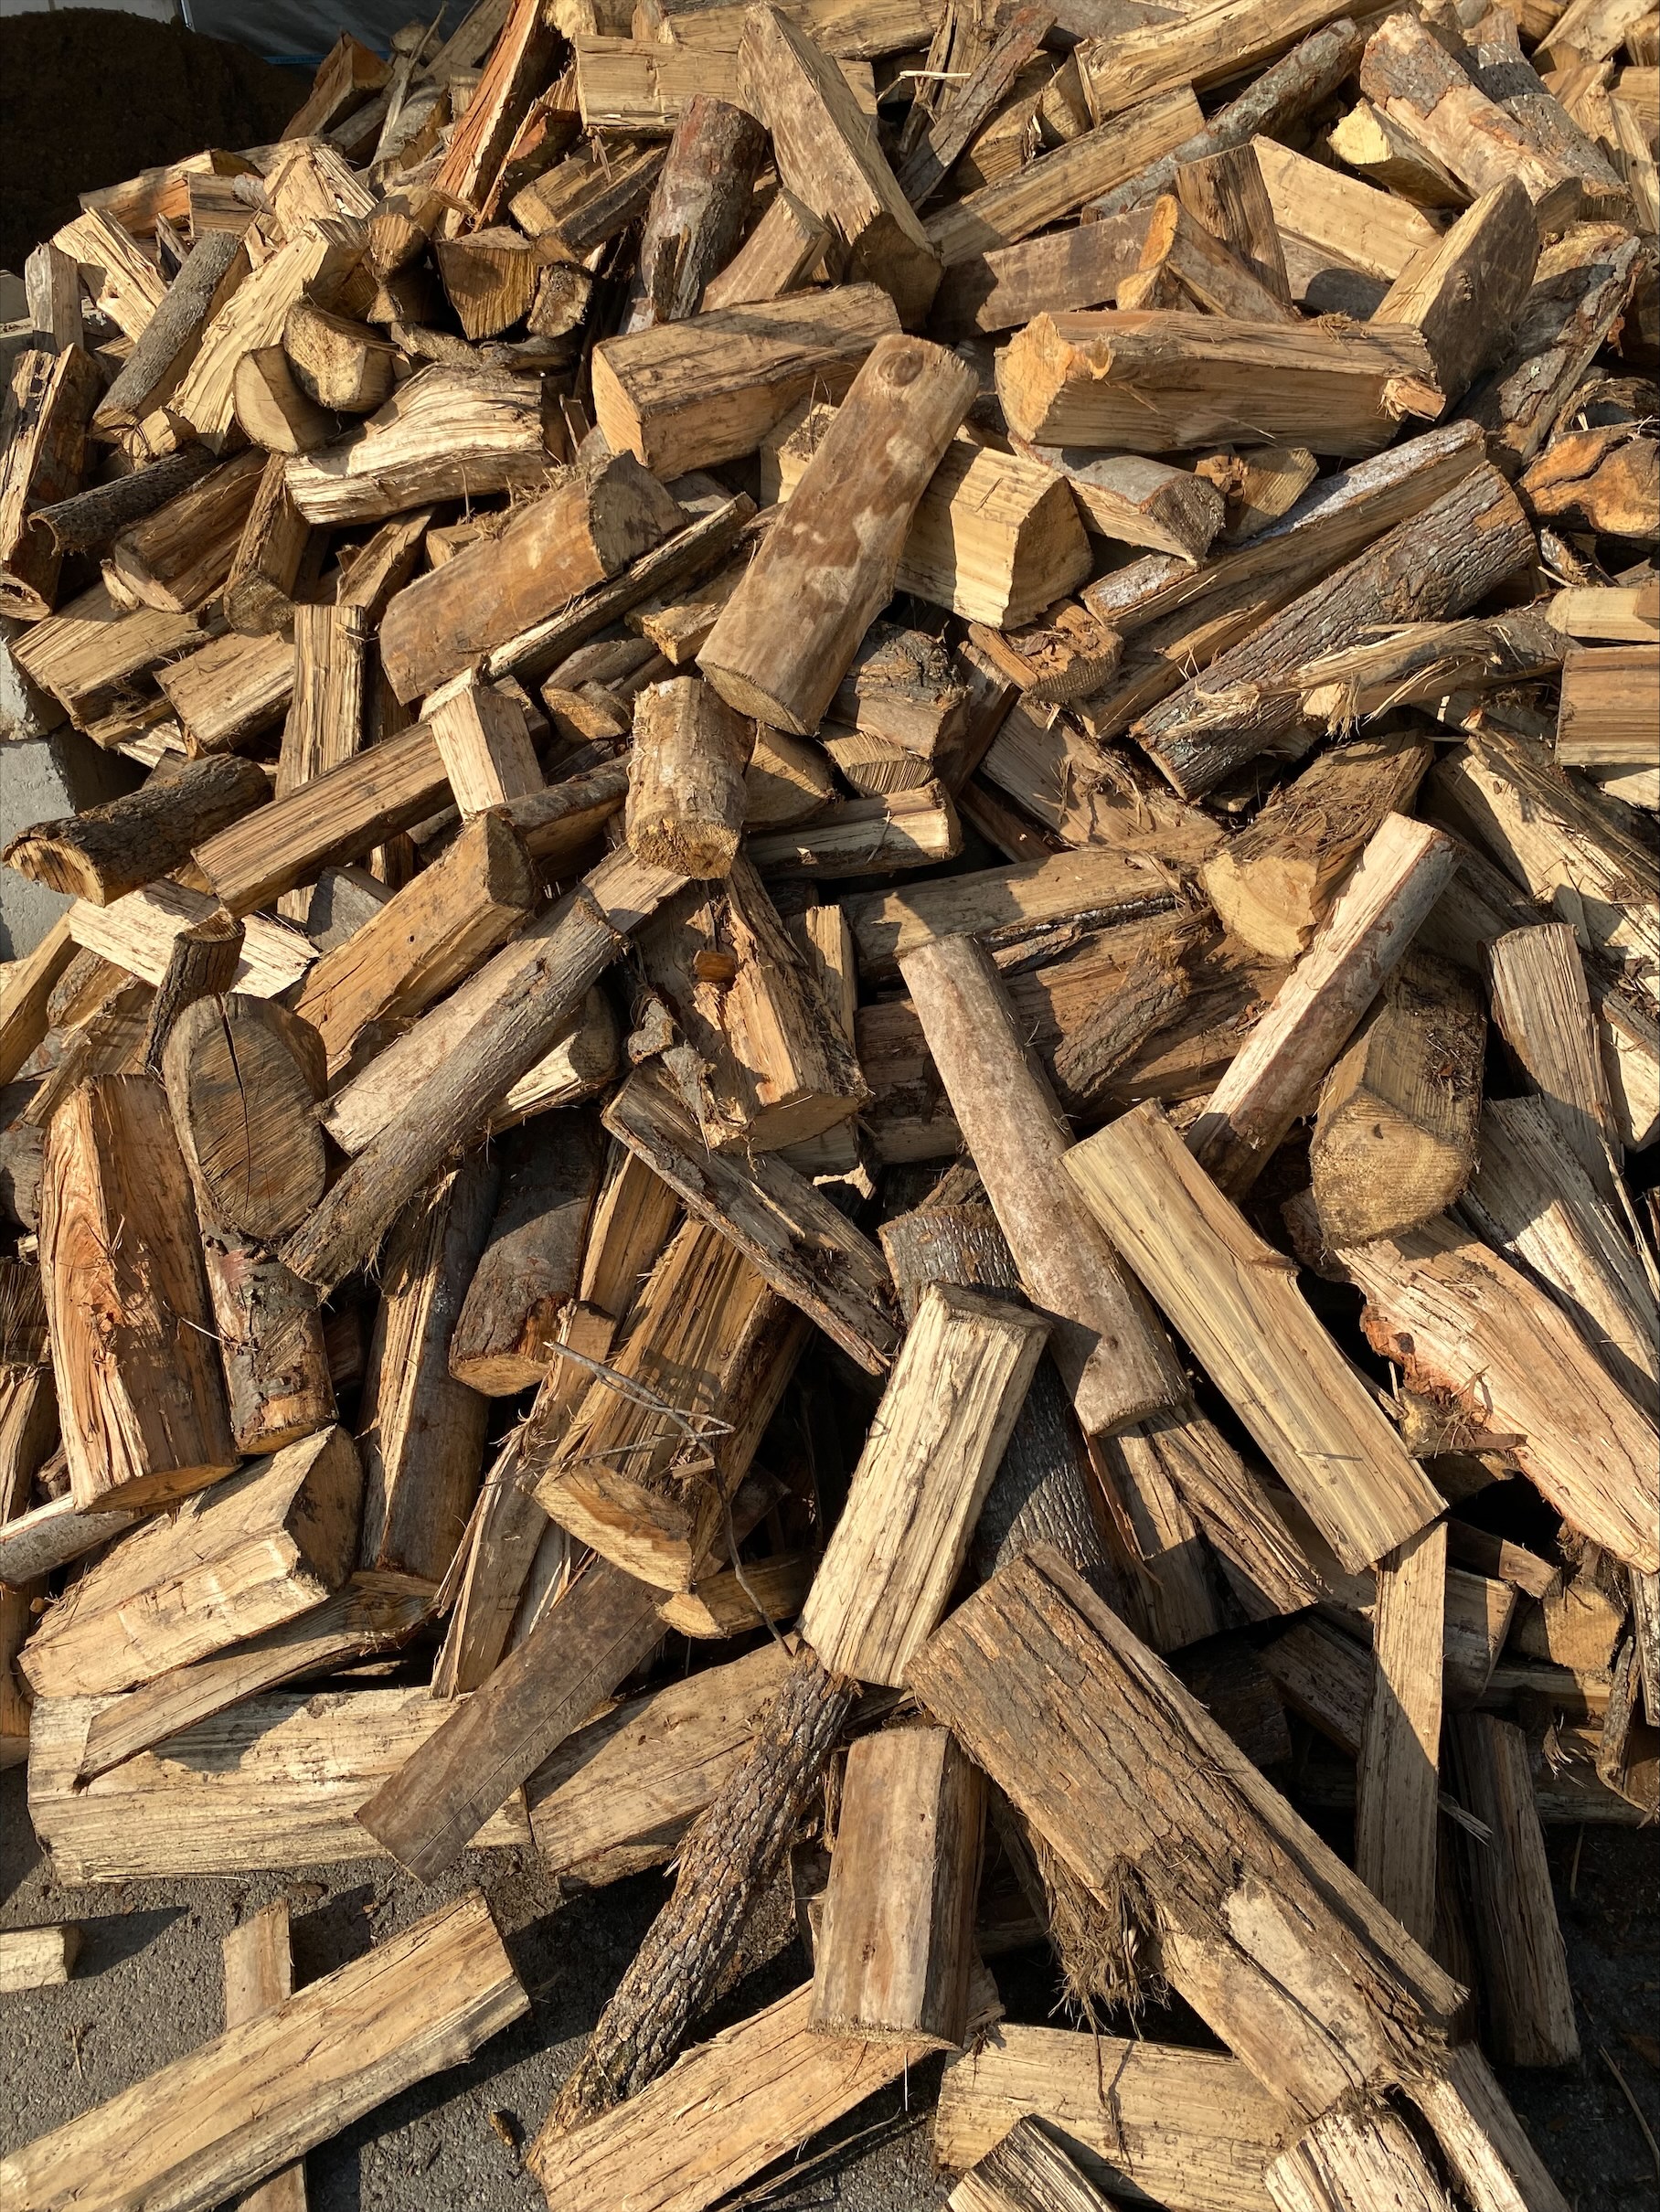 Mulch & Wood Tree Sales Des Moines - The Tree Doctor